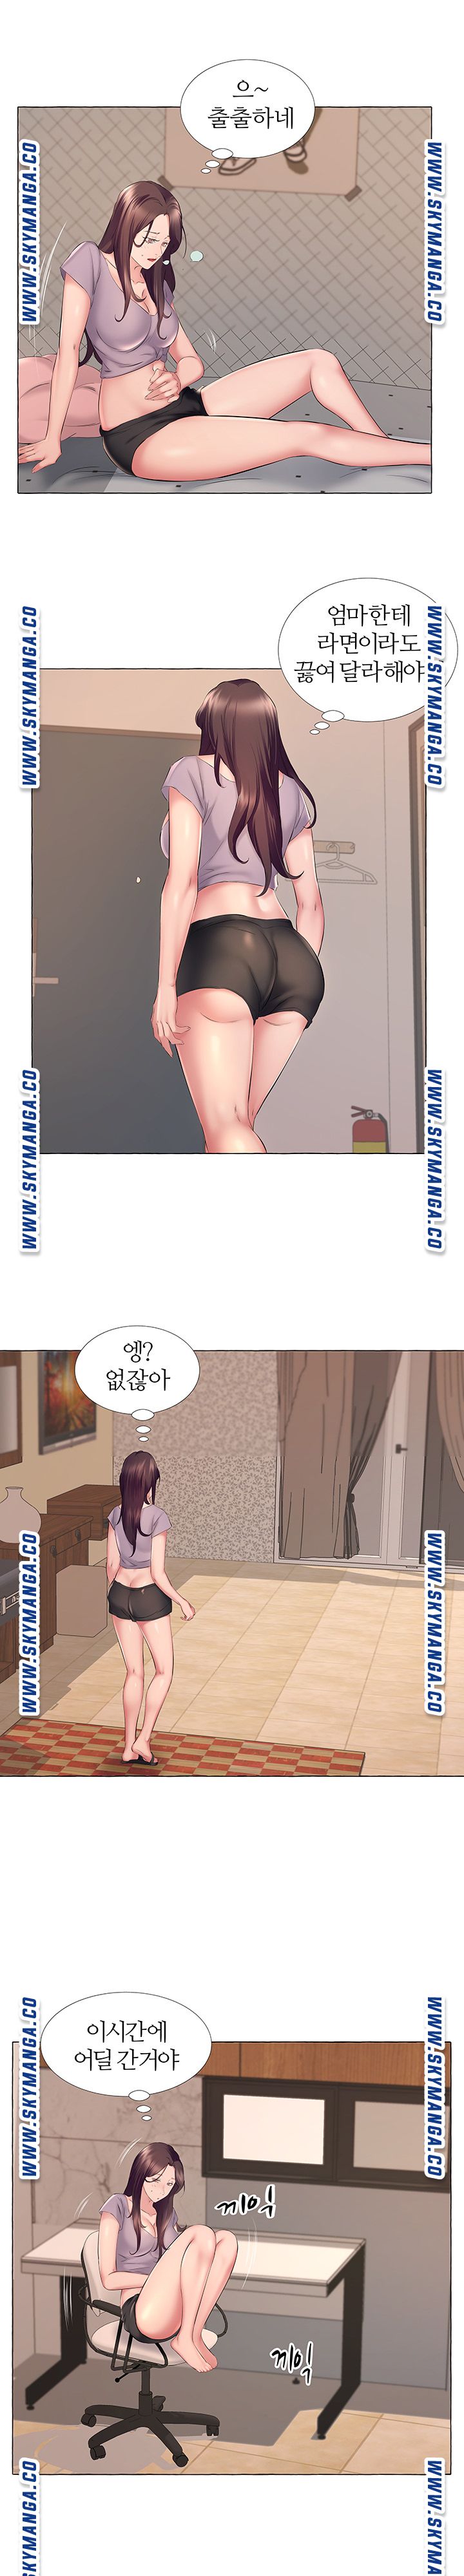 One Room Hotel Raw - Chapter 12 Page 11